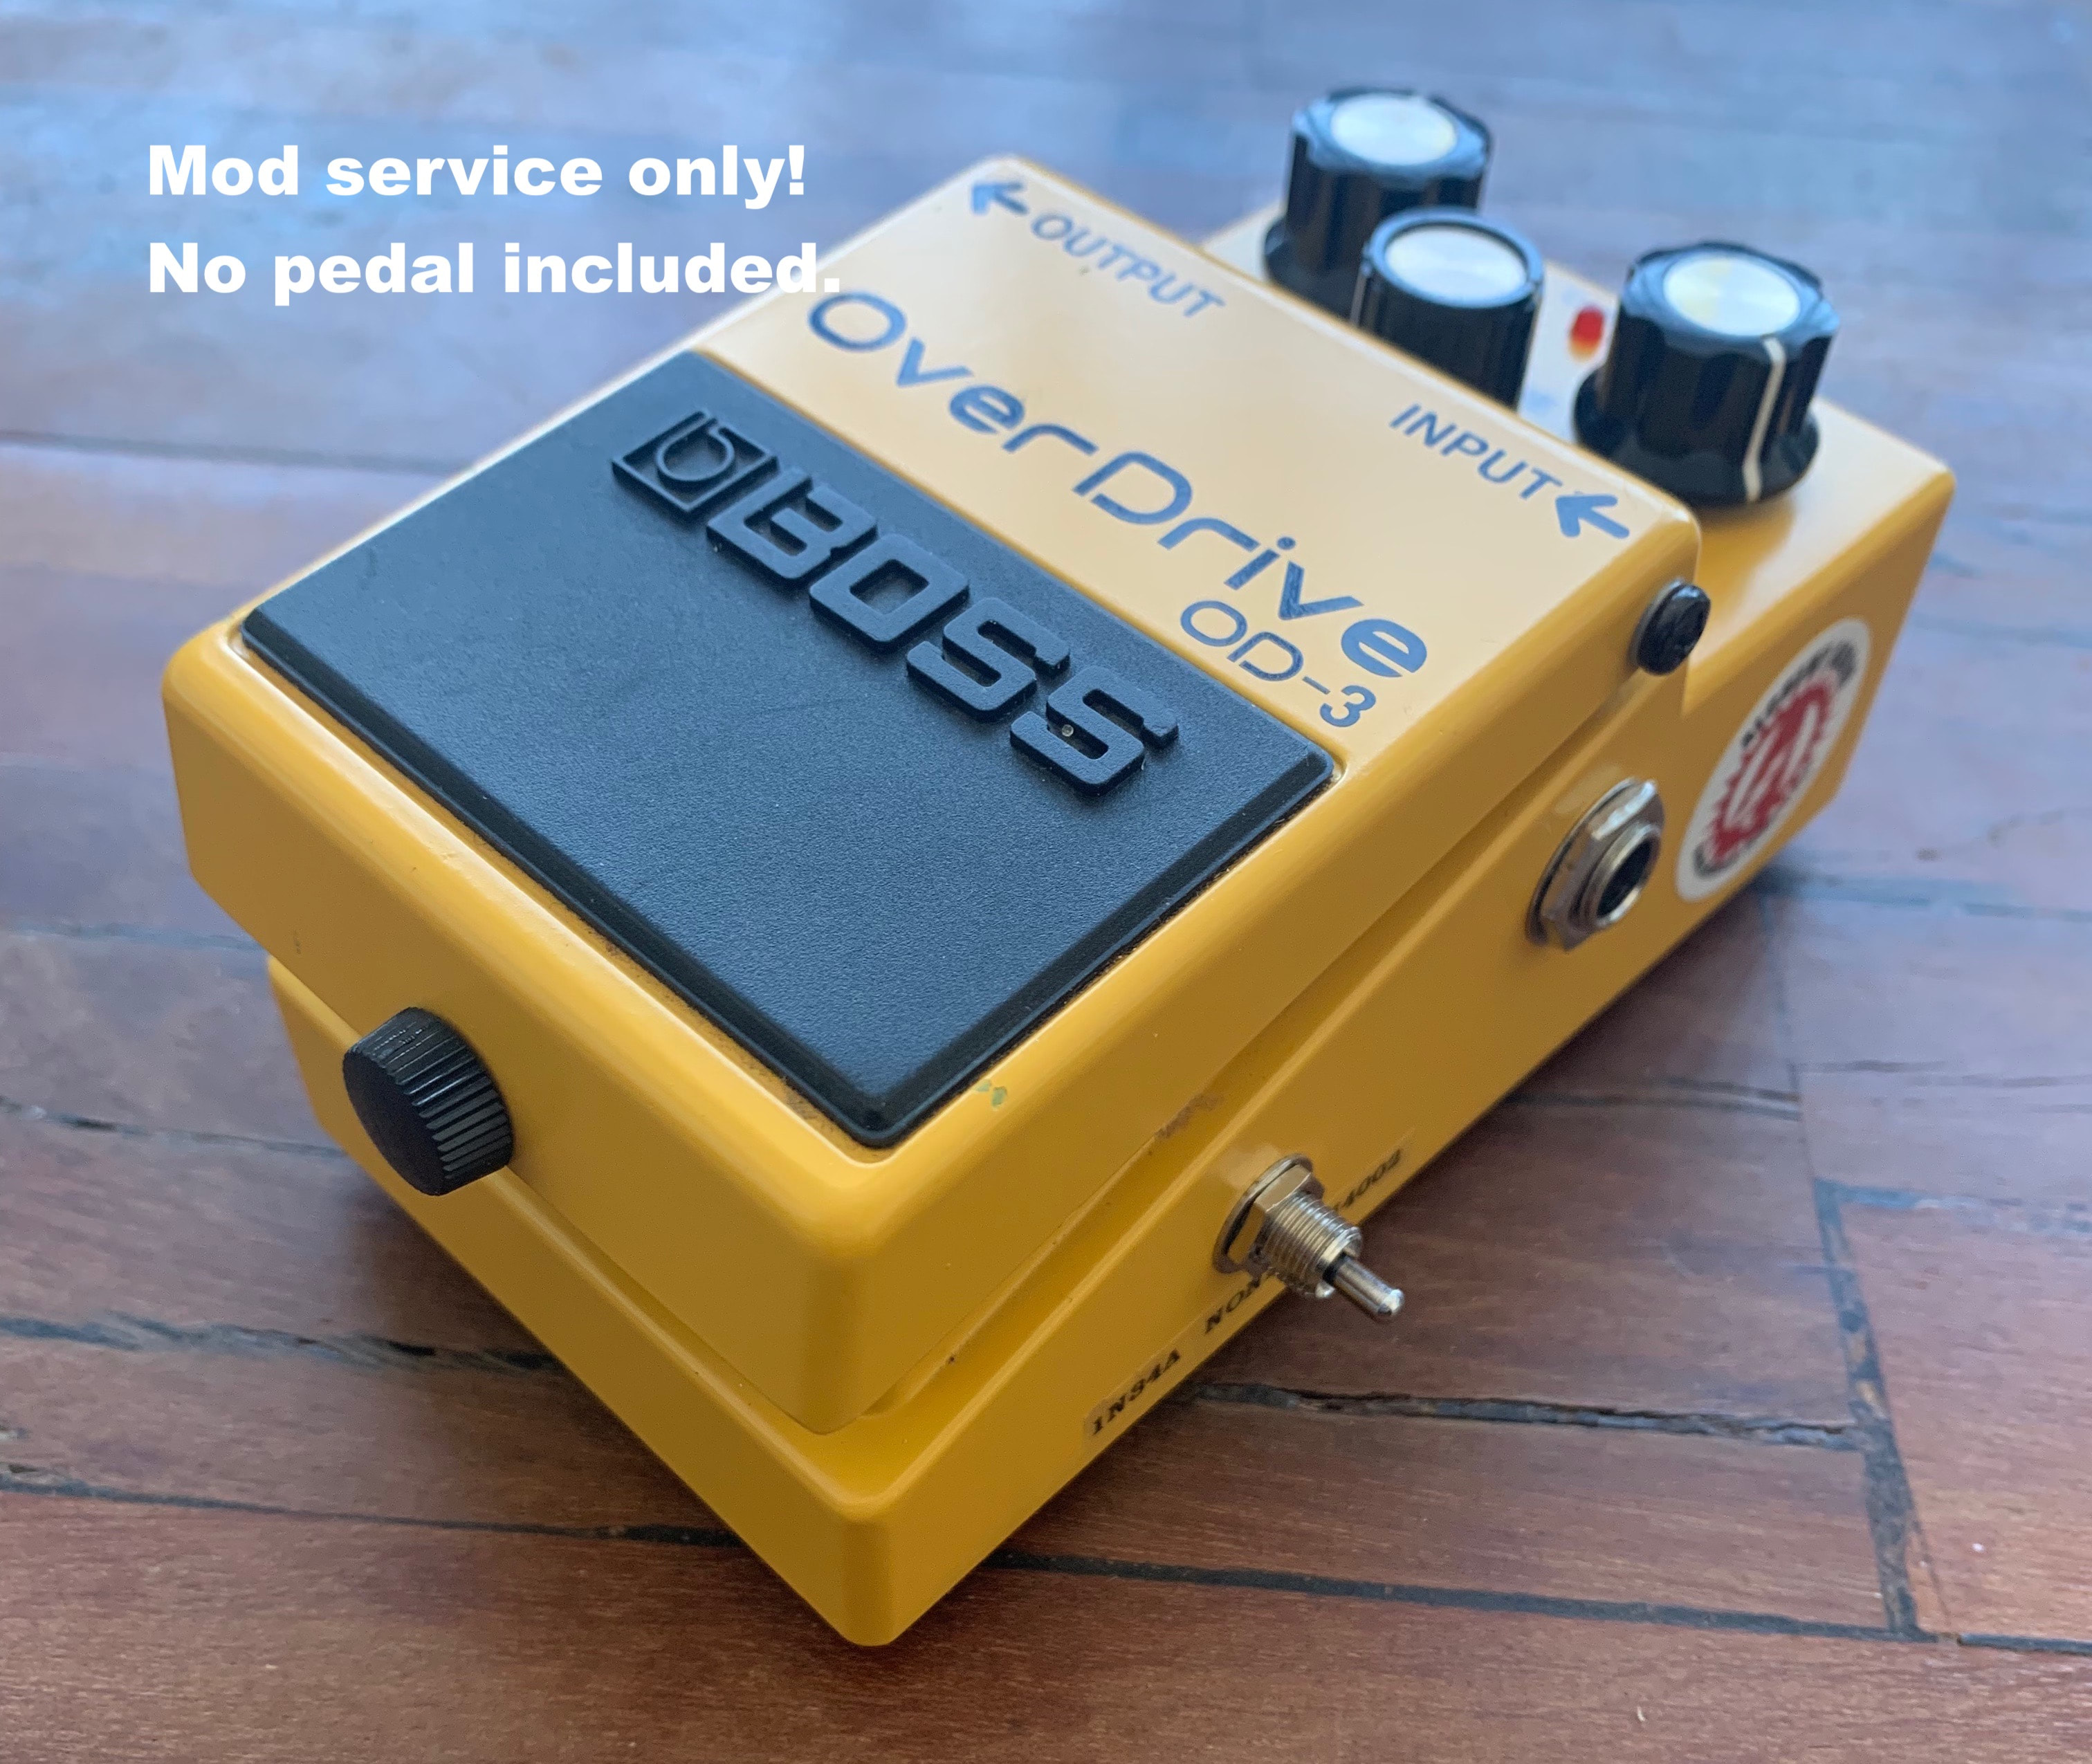 Modify your Boss OD-3 Overdrive with upgrades! Mod service Only!